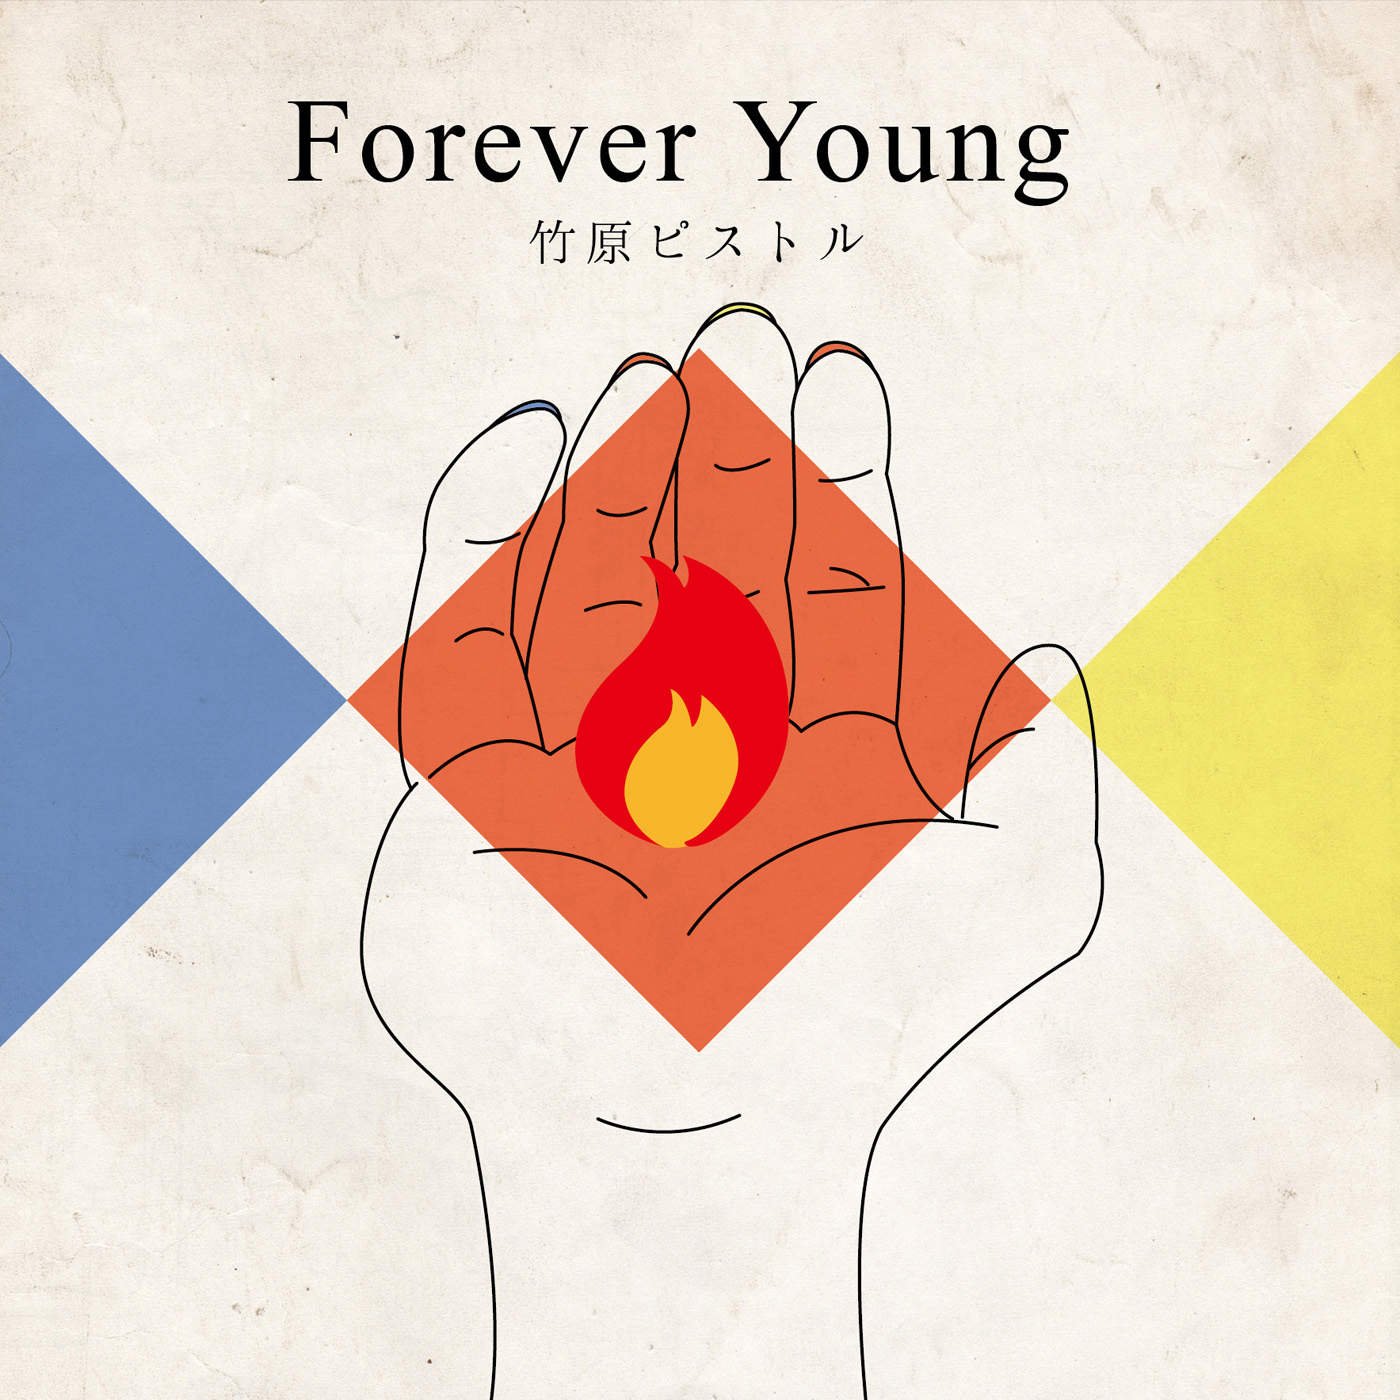 Young Forever альбом. Forever young обложка альбома. Теги Forever young. Forever young песня.